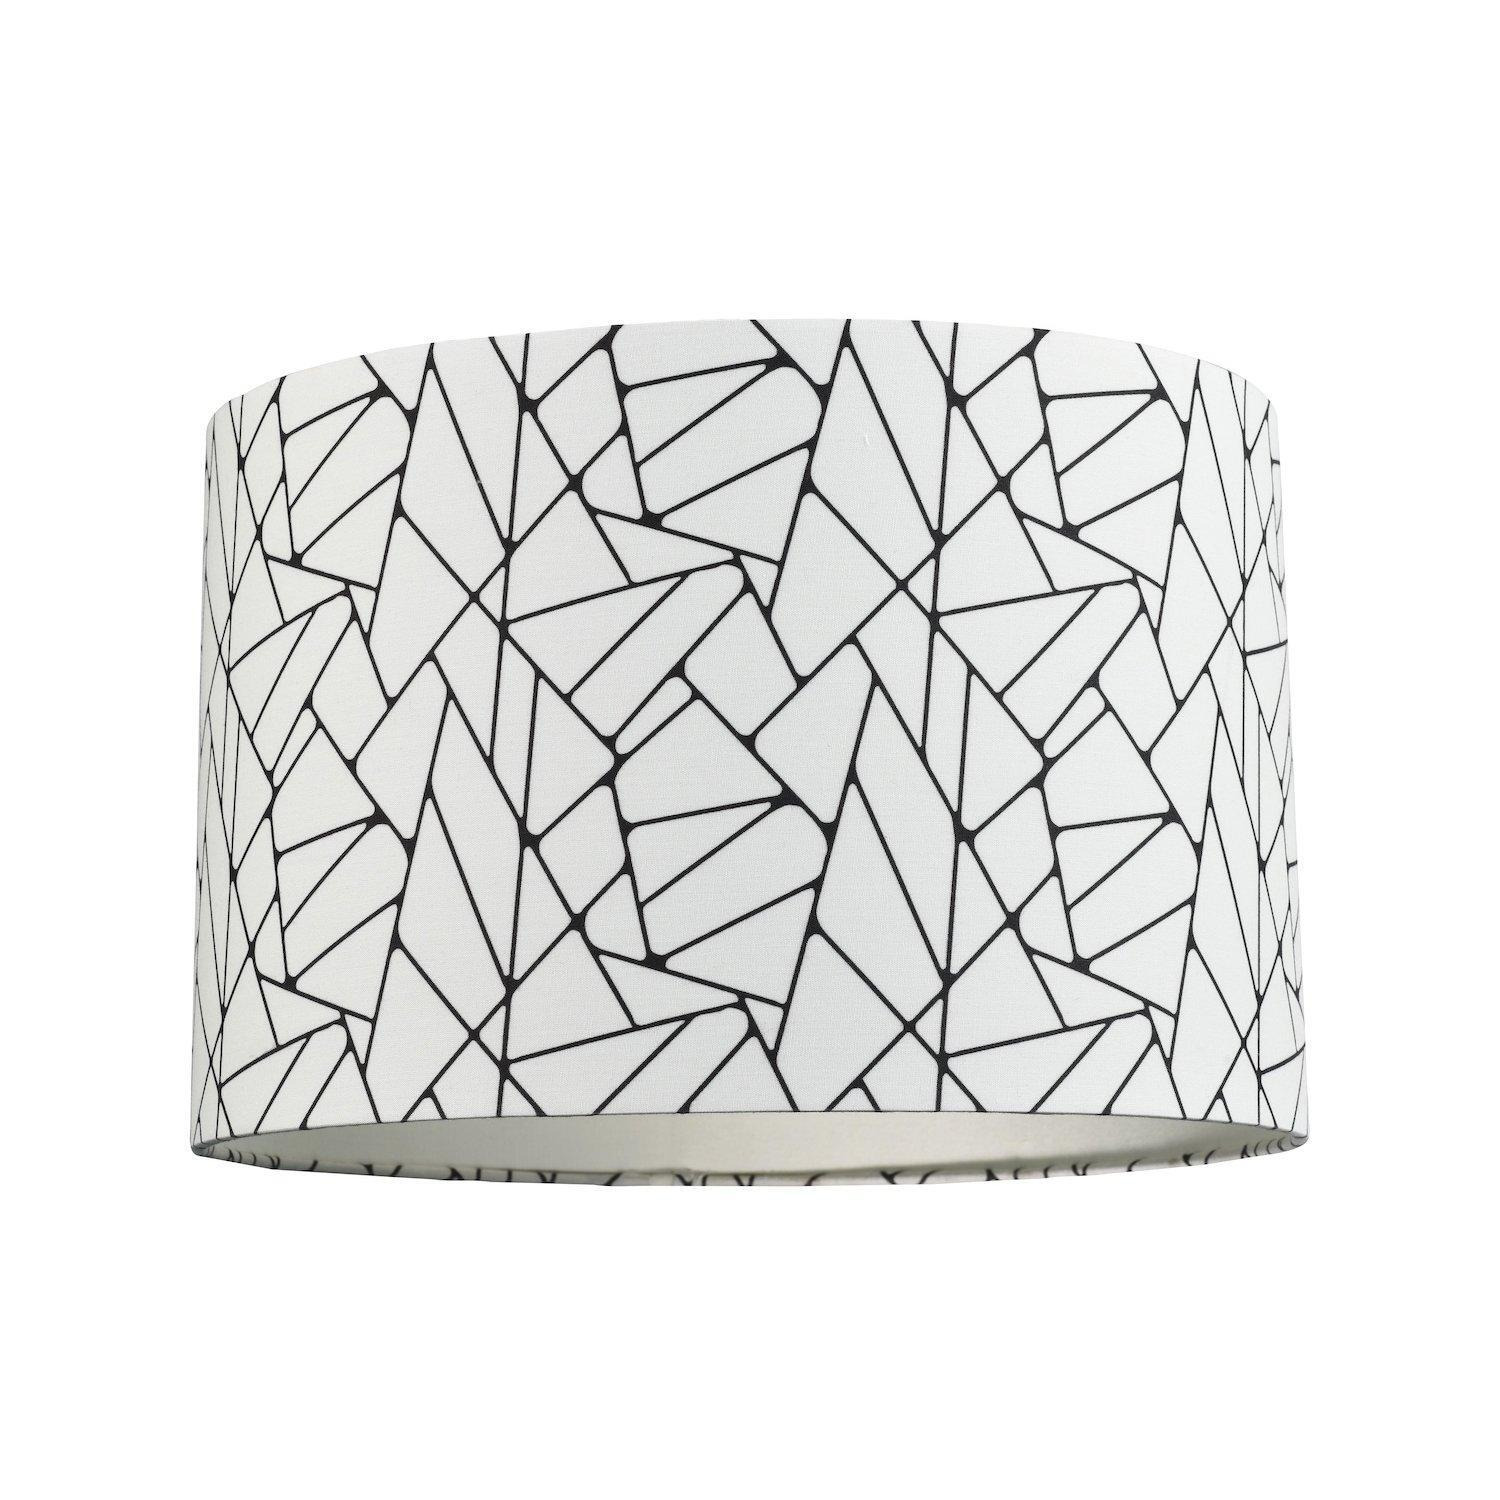 Off-White and Black Geometric Drum Lamp Shade with Inner Cotton Fabric Lining - image 1